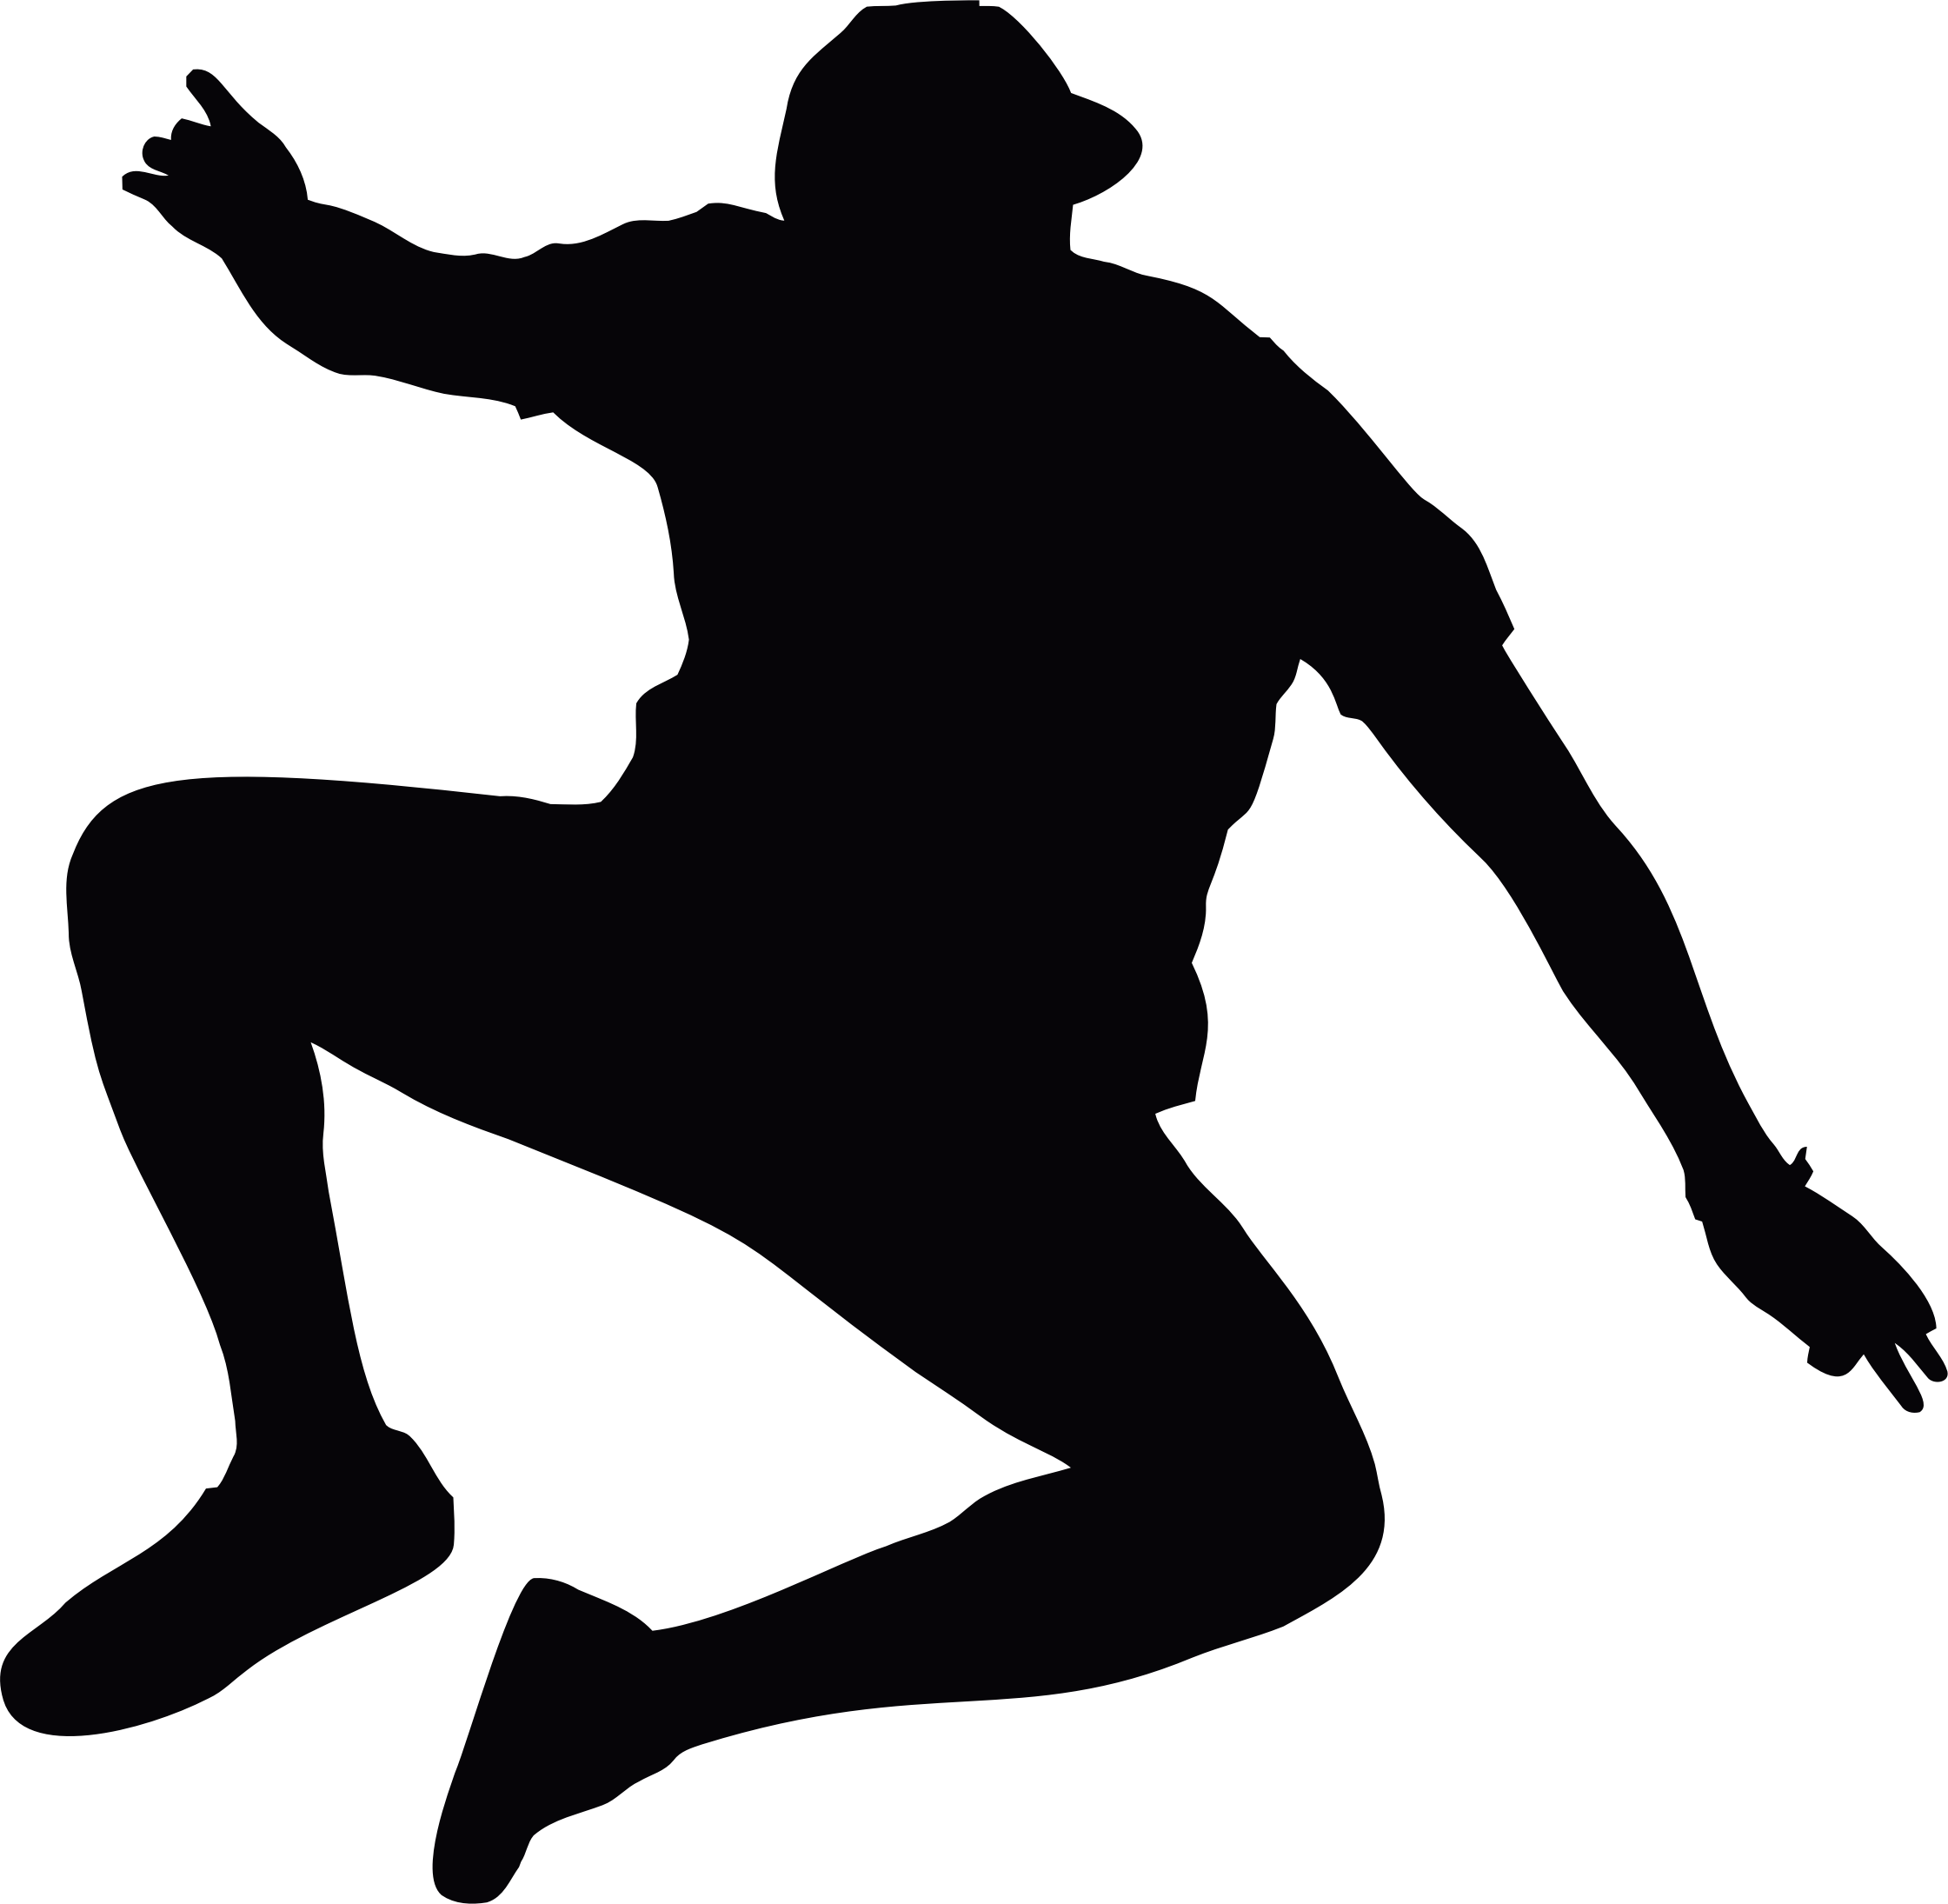 Jumping Man Silhouette - Jumping People Silhouette Png (2241x2190)